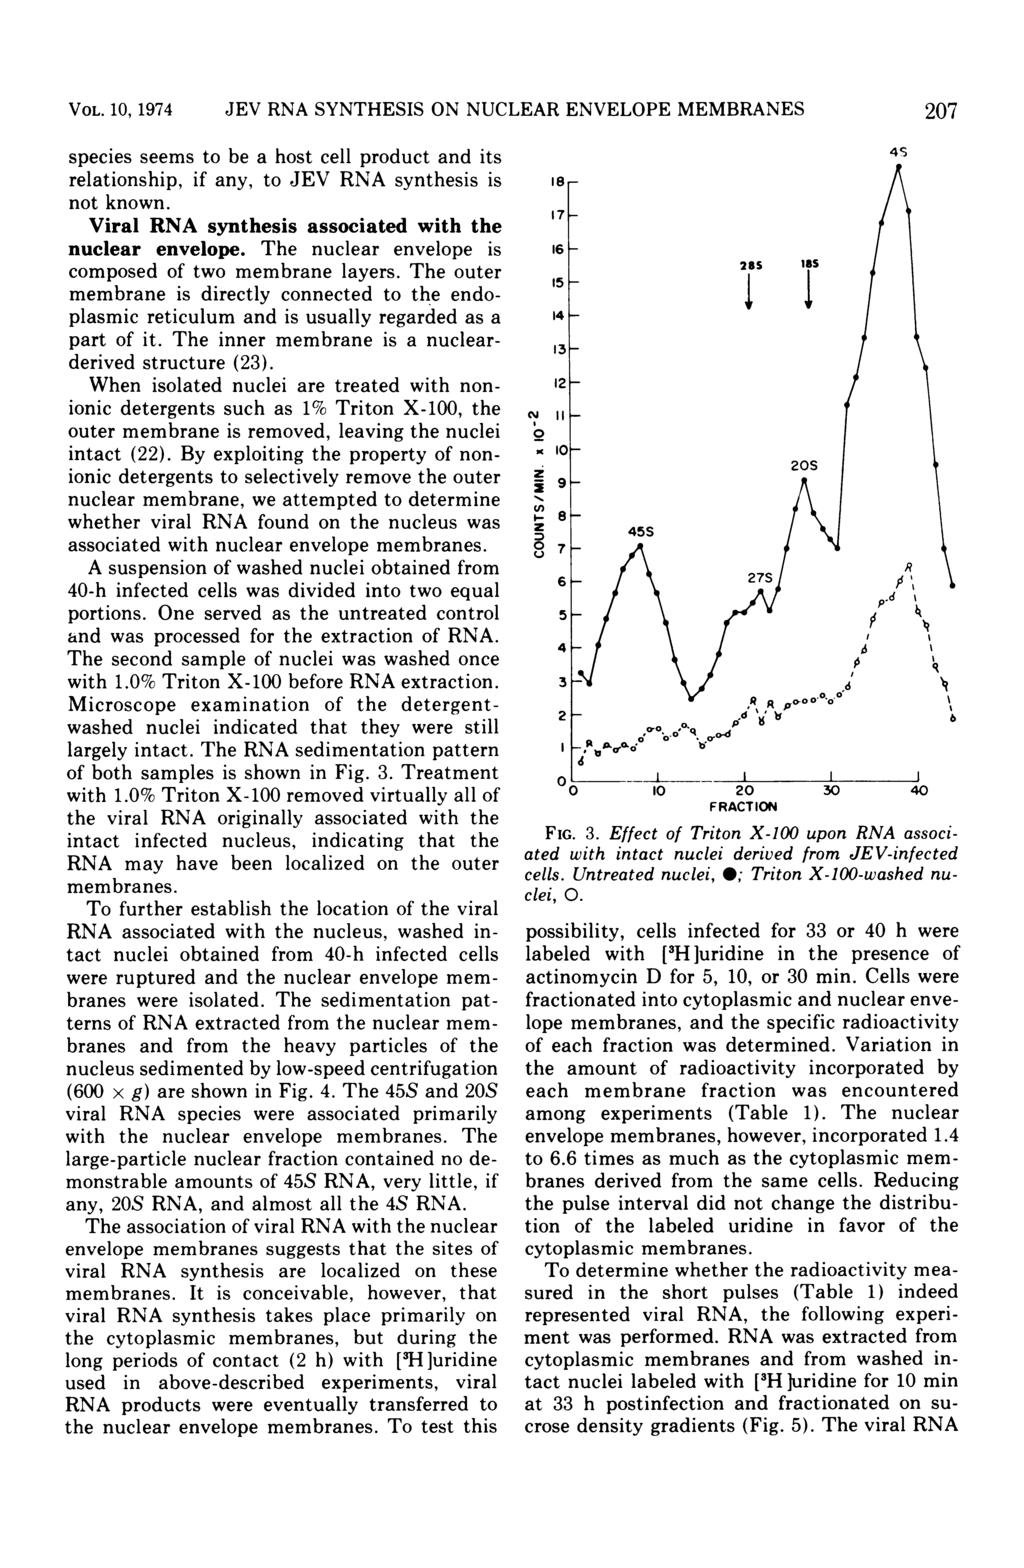 VOL. 10, 1974 JEV RNA SYNTHESIS ON NUCLEAR ENVELOPE MEMBRANES species seems to be a host cell product and its relationship, if any, to JEV RNA synthesis is not known.